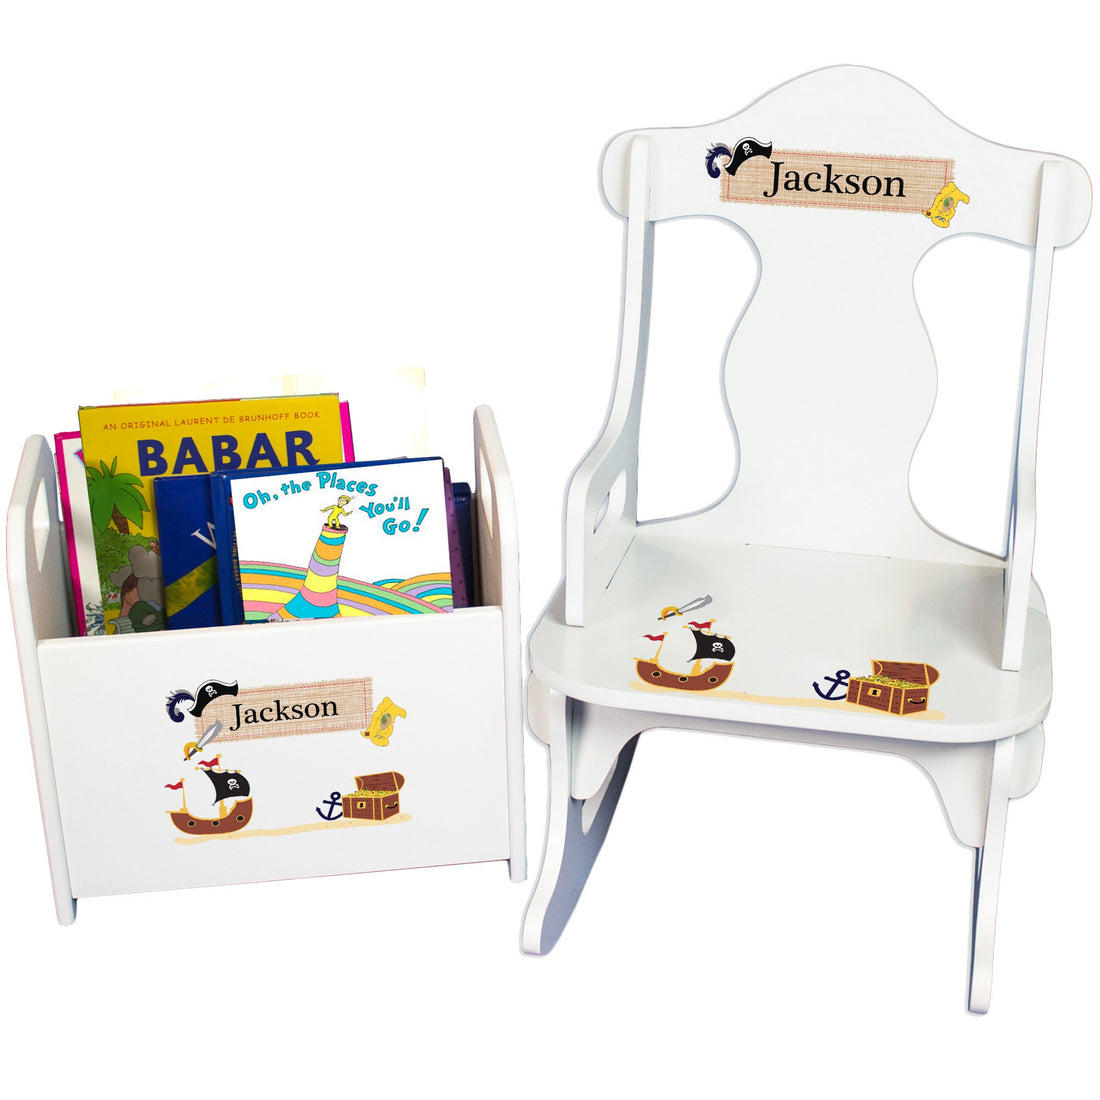 Personalized Pirate Book Caddy And Puzzle Rocker baby gift set